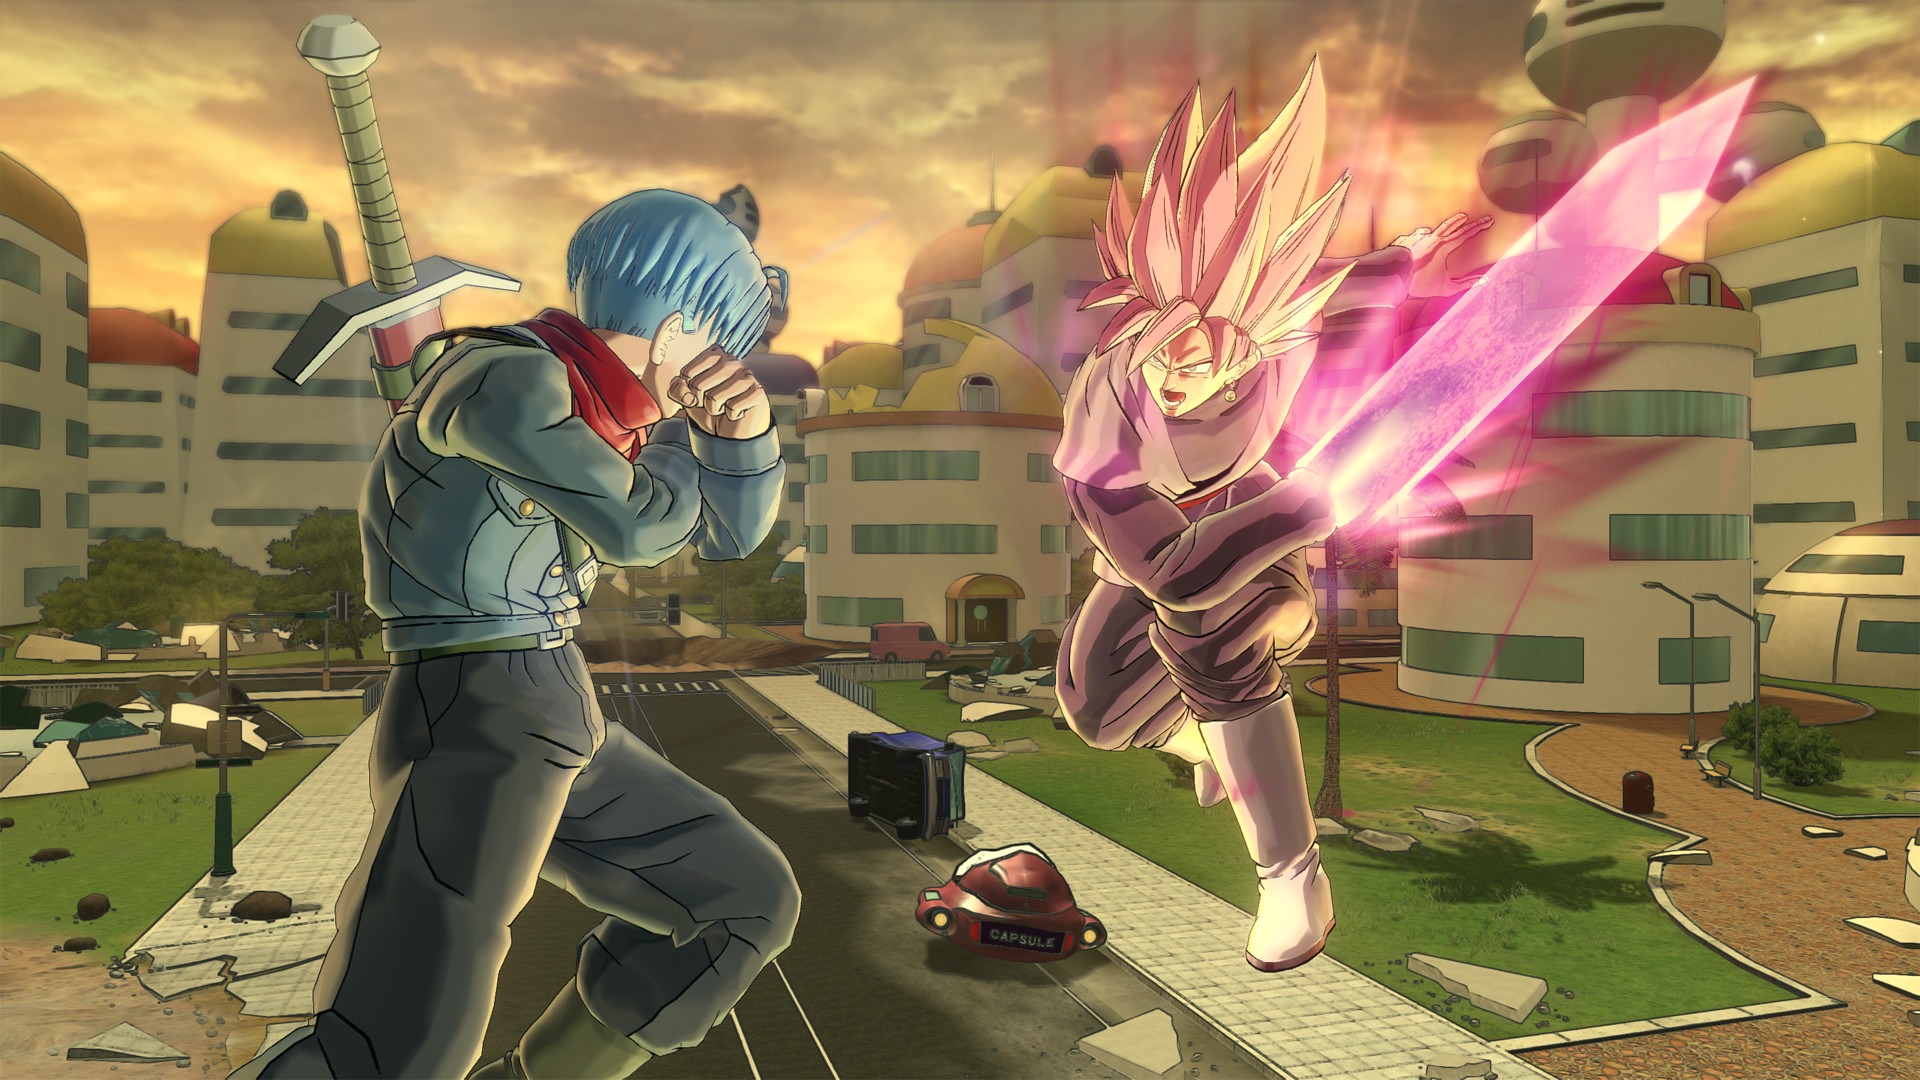 DRAGON BALL XENOVERSE 2 - Super Pack 3 on Steam